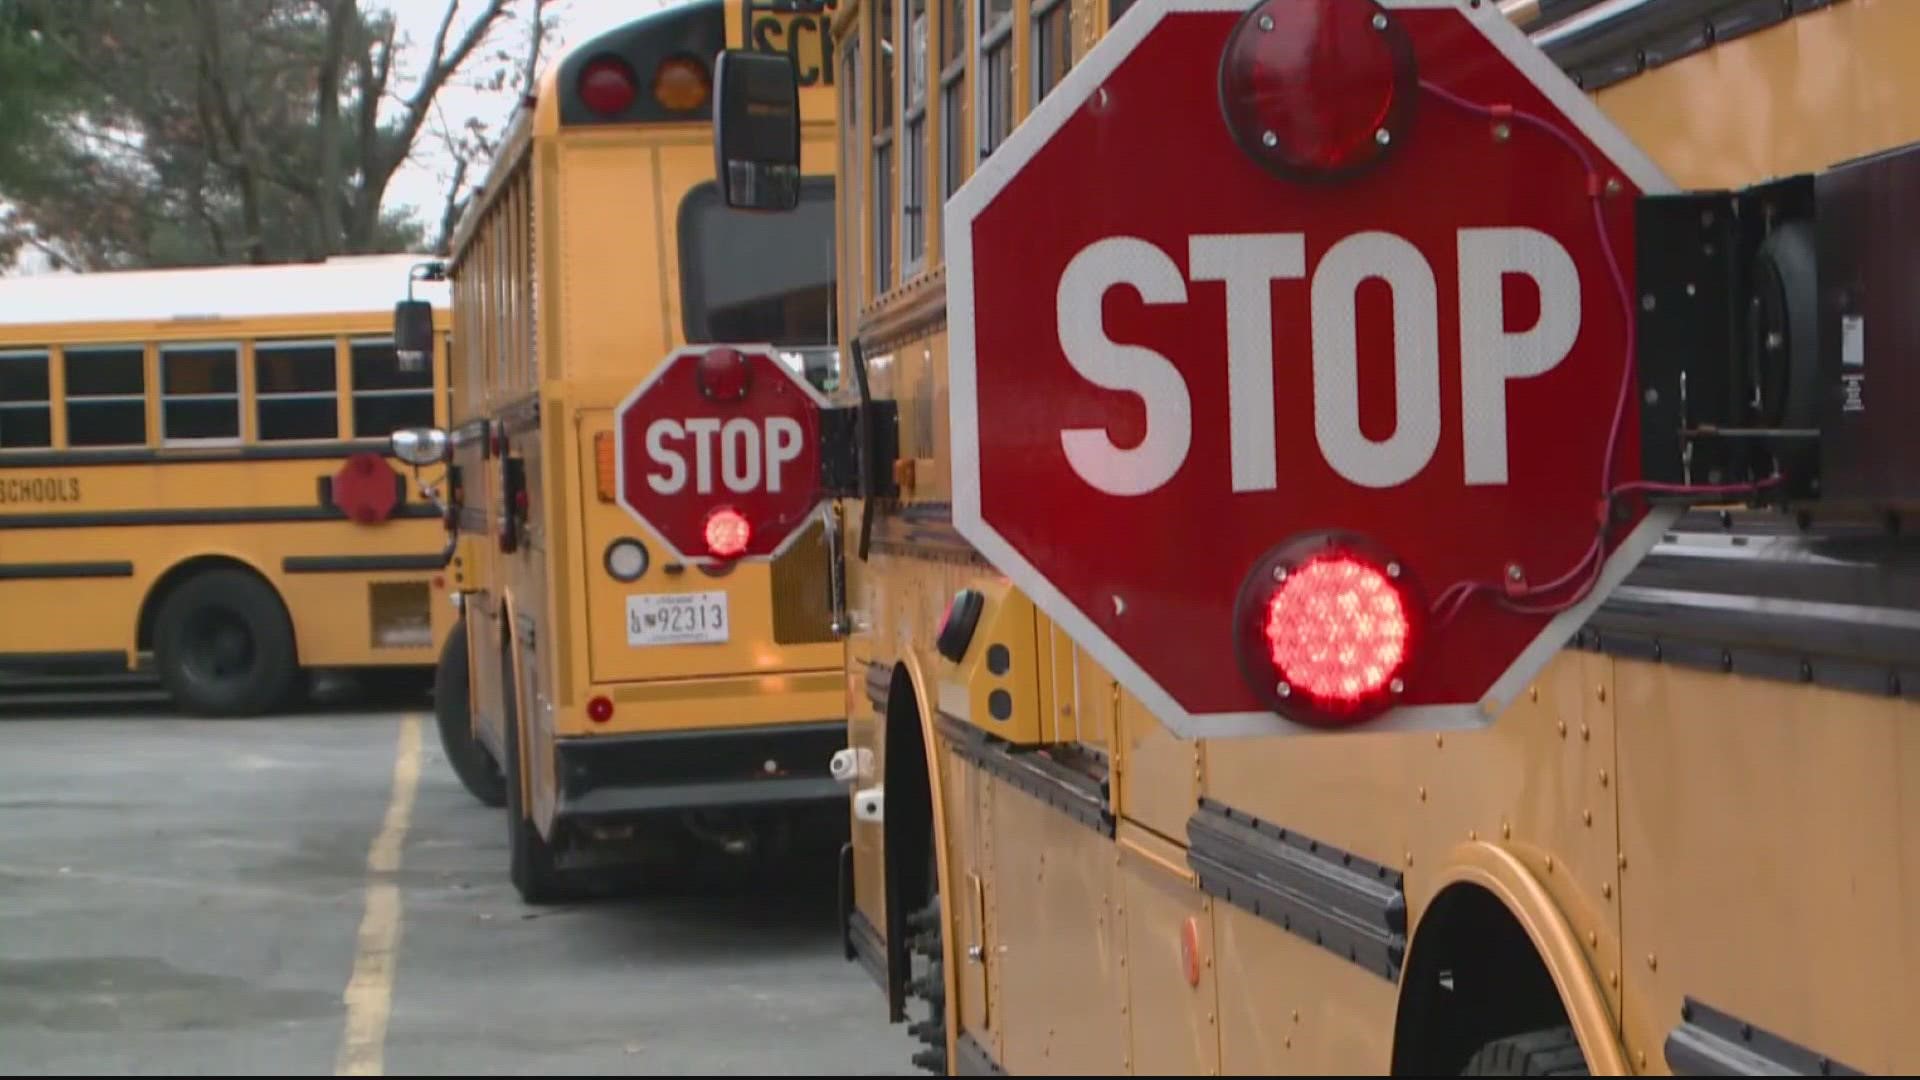 Montgomery County police are warning drivers to wait for stopped school buses or they will get slapped with a steep fine